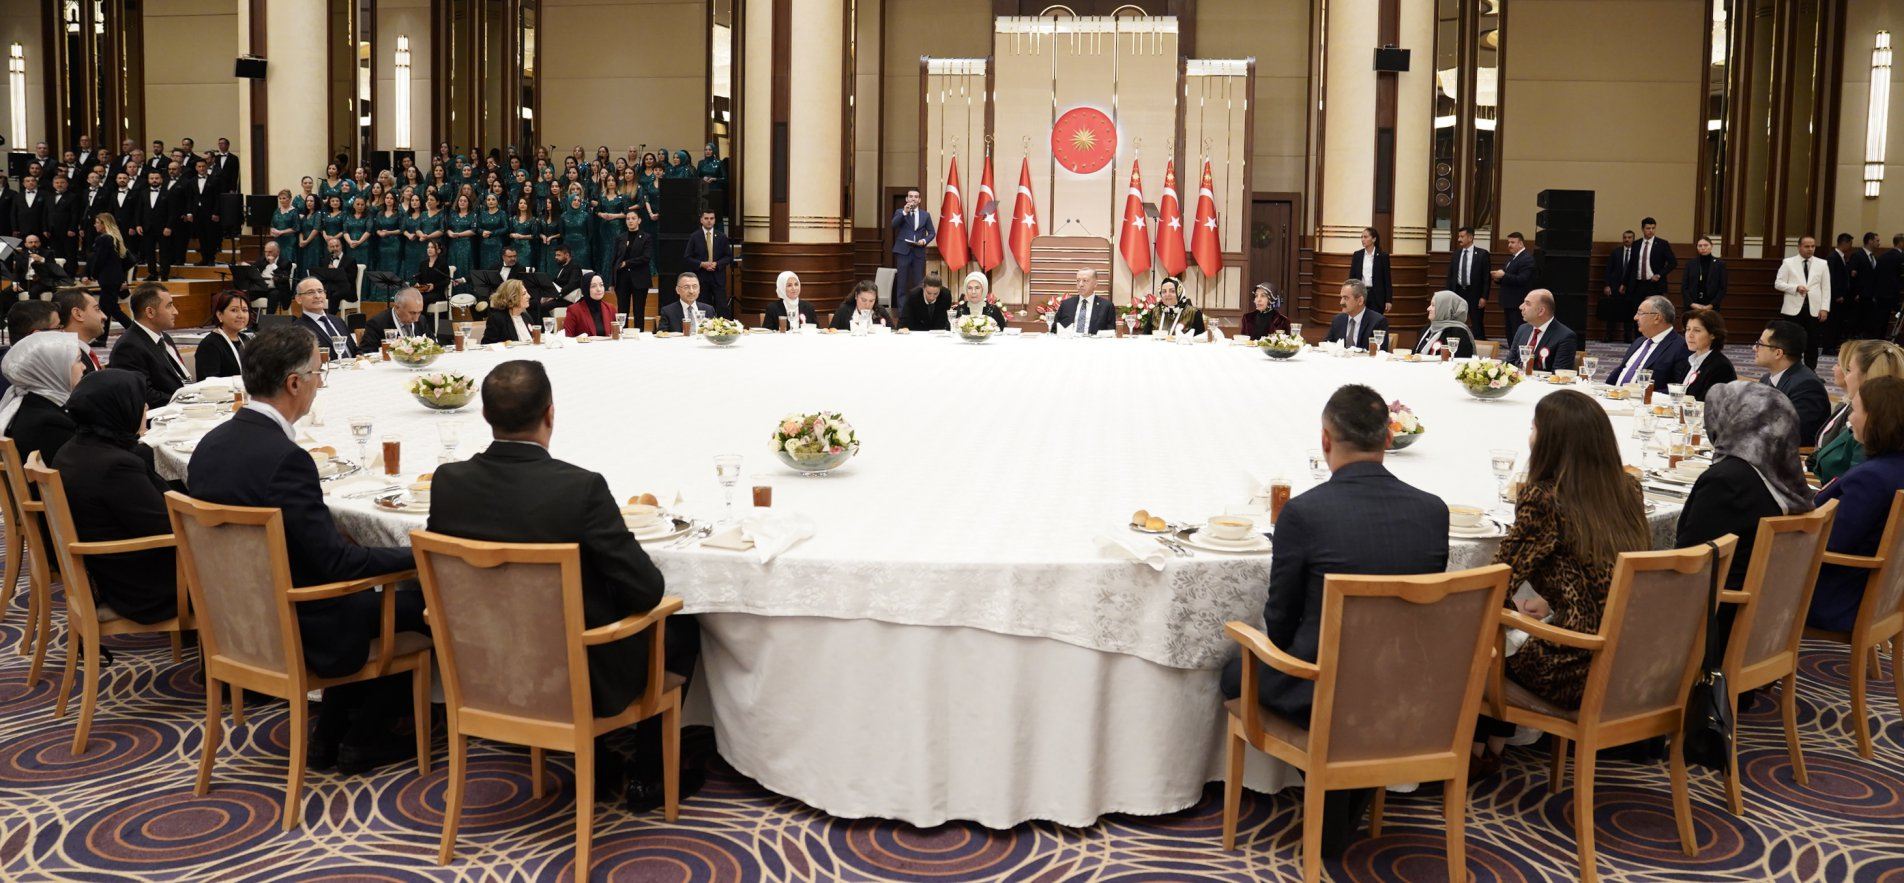 PRESIDENT ERDOĞAN RECEIVED MINISTER ÖZER AND ACCOMPANYING TEACHERS ON THE OCCASION OF TEACHERS' DAY